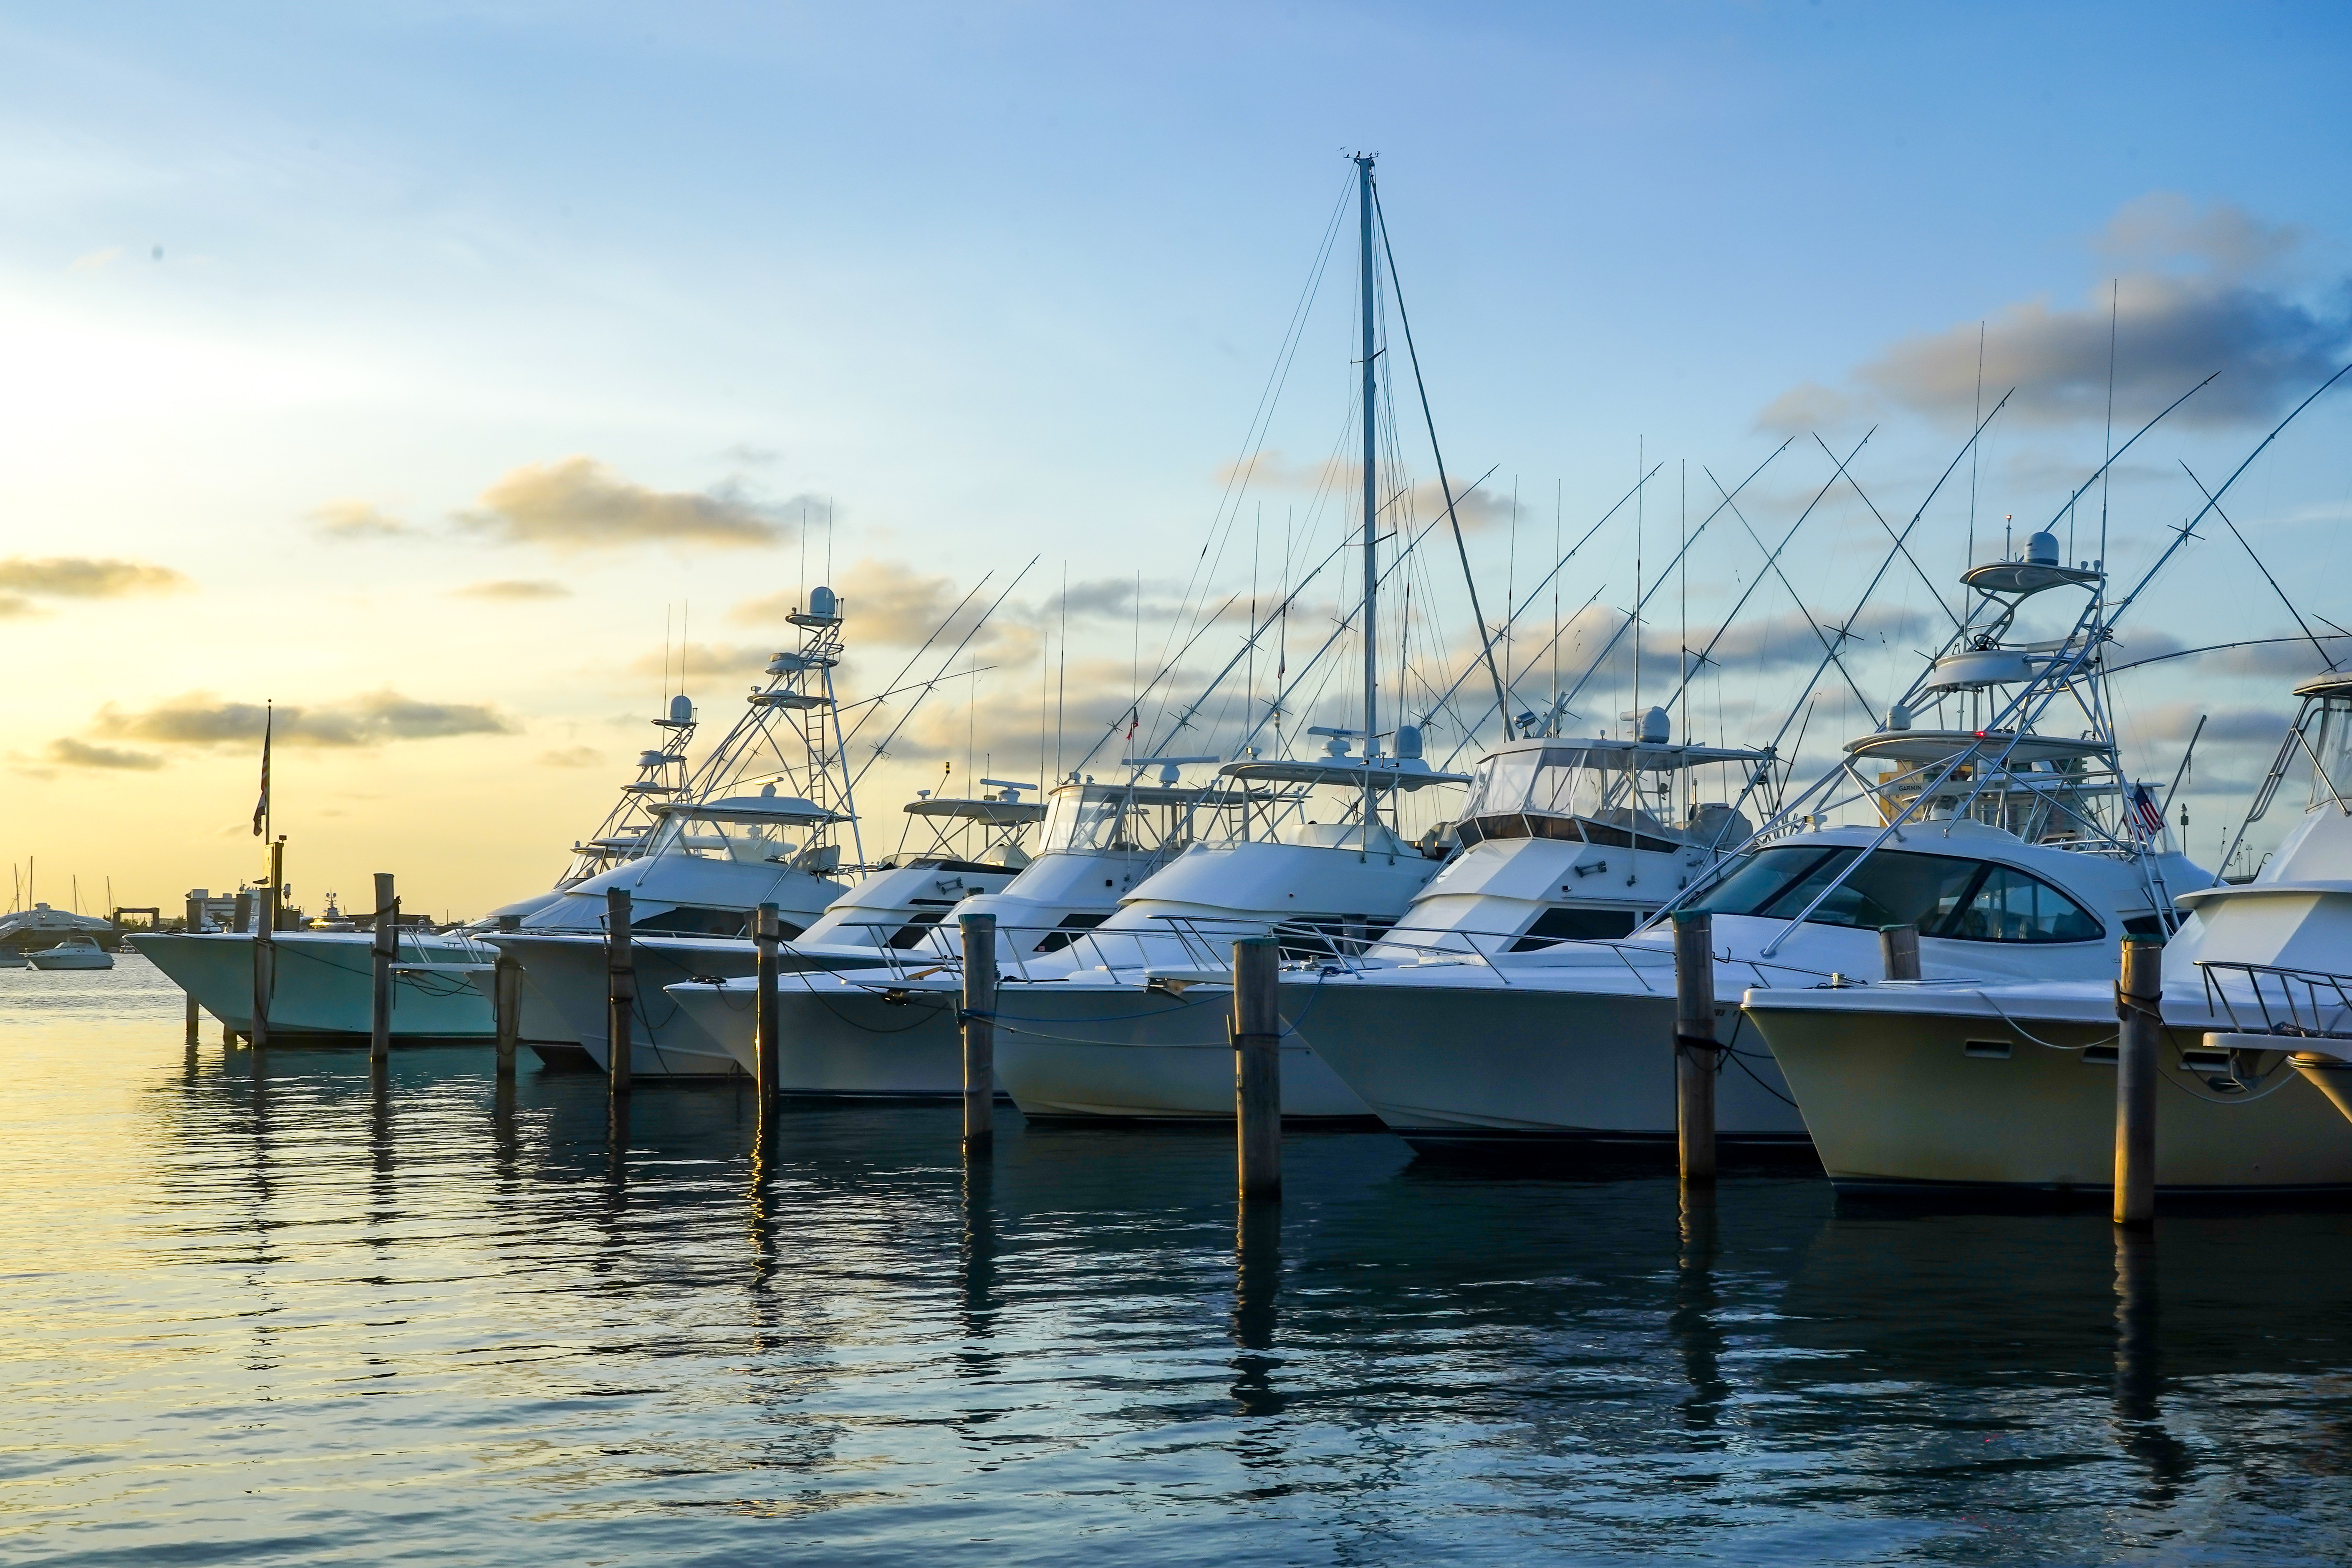 Fishing charter boats docked at a marina, showcasing a picturesque scene of recreational fishing vessels ready for adventures on the water.